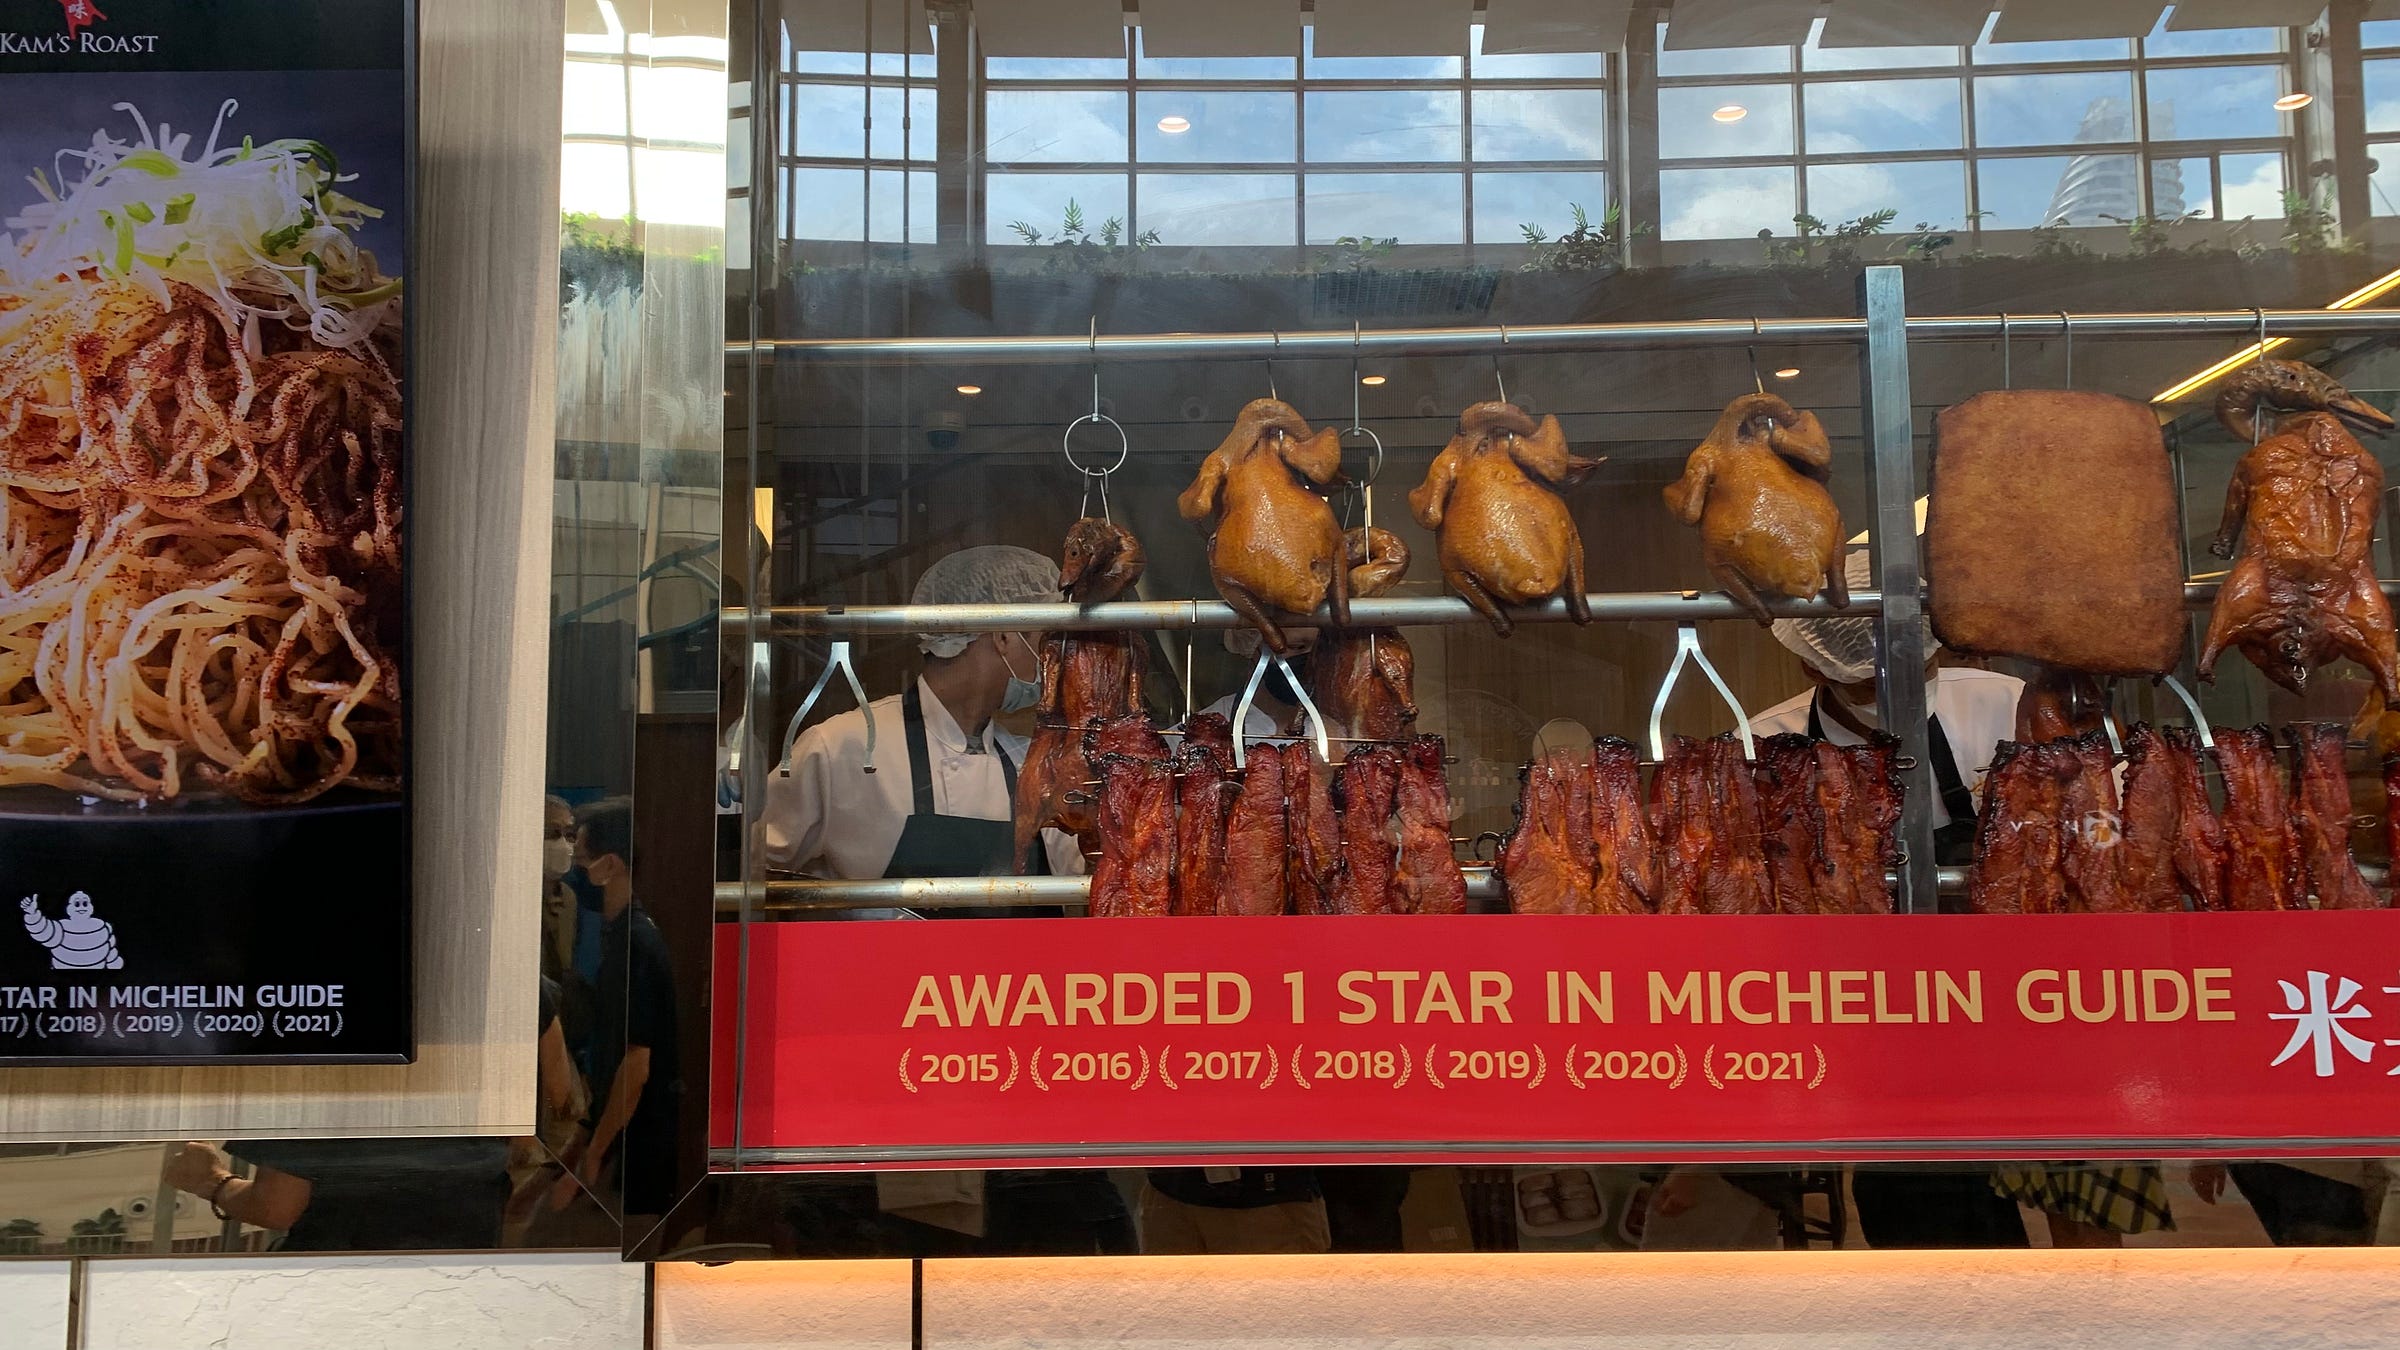 View of roasted meats hanging in a restaurant window displaying consecutive years of 1 Michelin star.